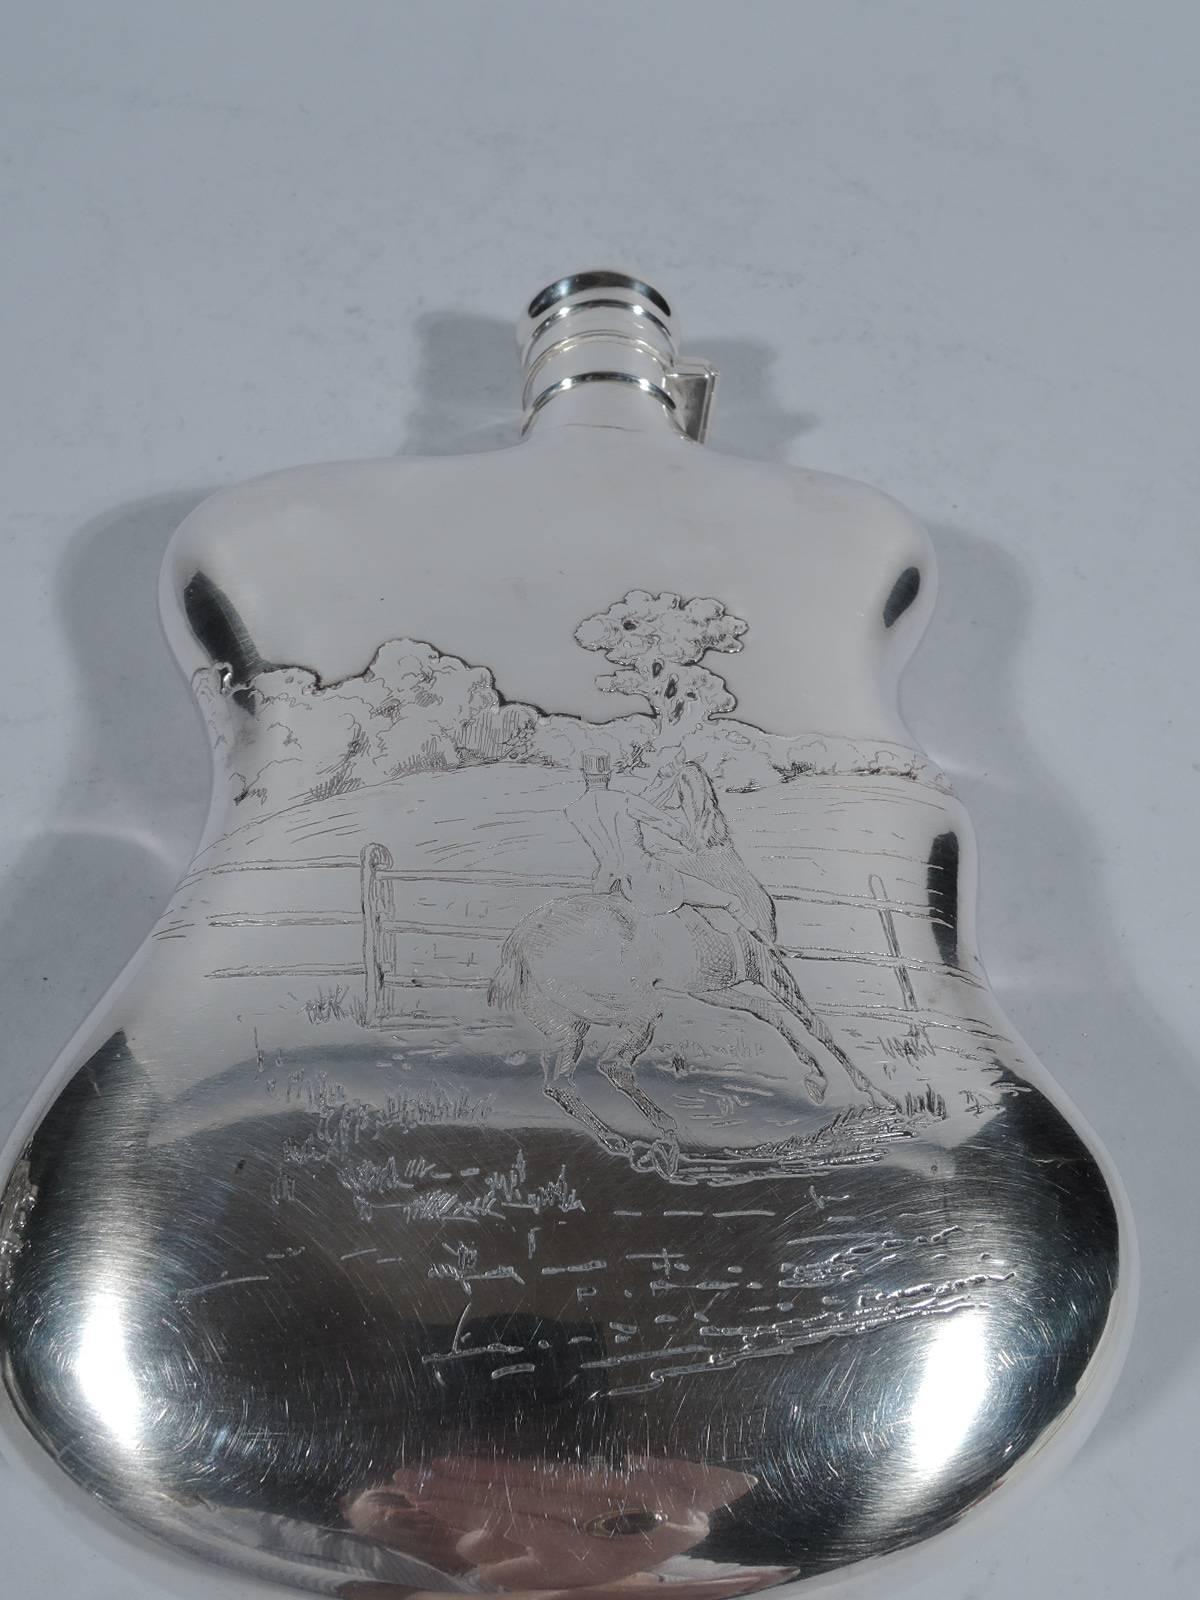 Sterling silver flask with fox hunt motif. Made by Gorham in Providence in 1885. Easy-grip shape with hinged and cork-lined cover. Engraved and acid-etched scenes. On the front, hunters ride through the countryside. On the back, a top-hatted rider